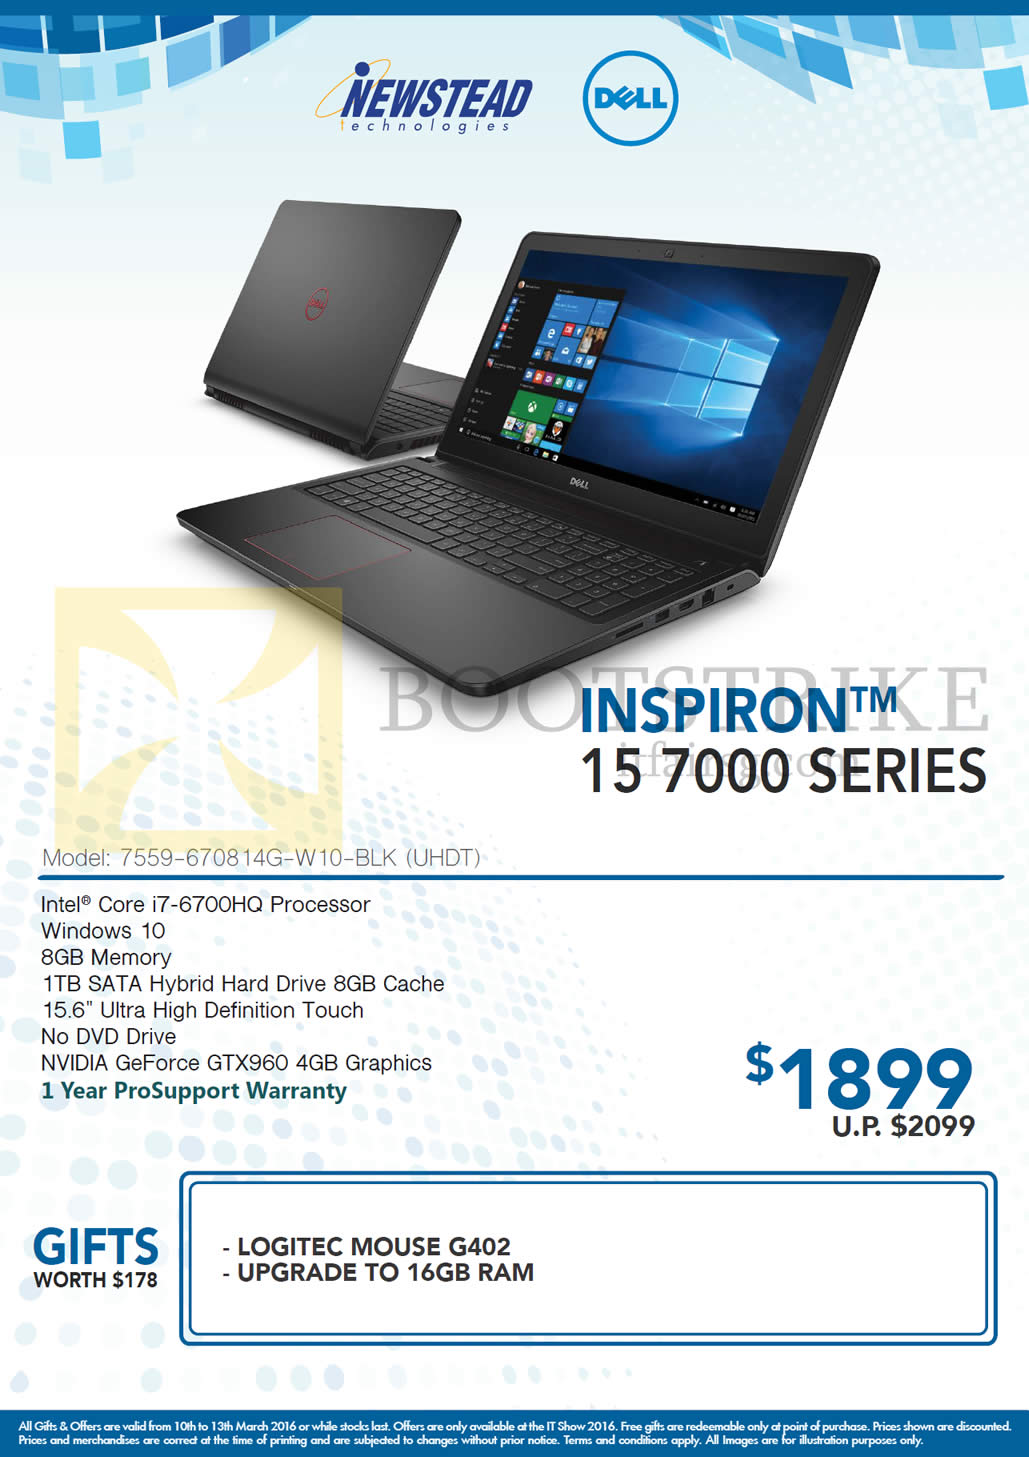 IT SHOW 2016 price list image brochure of Dell Newstead Notebook Inspiron 15 7000 Series (2)